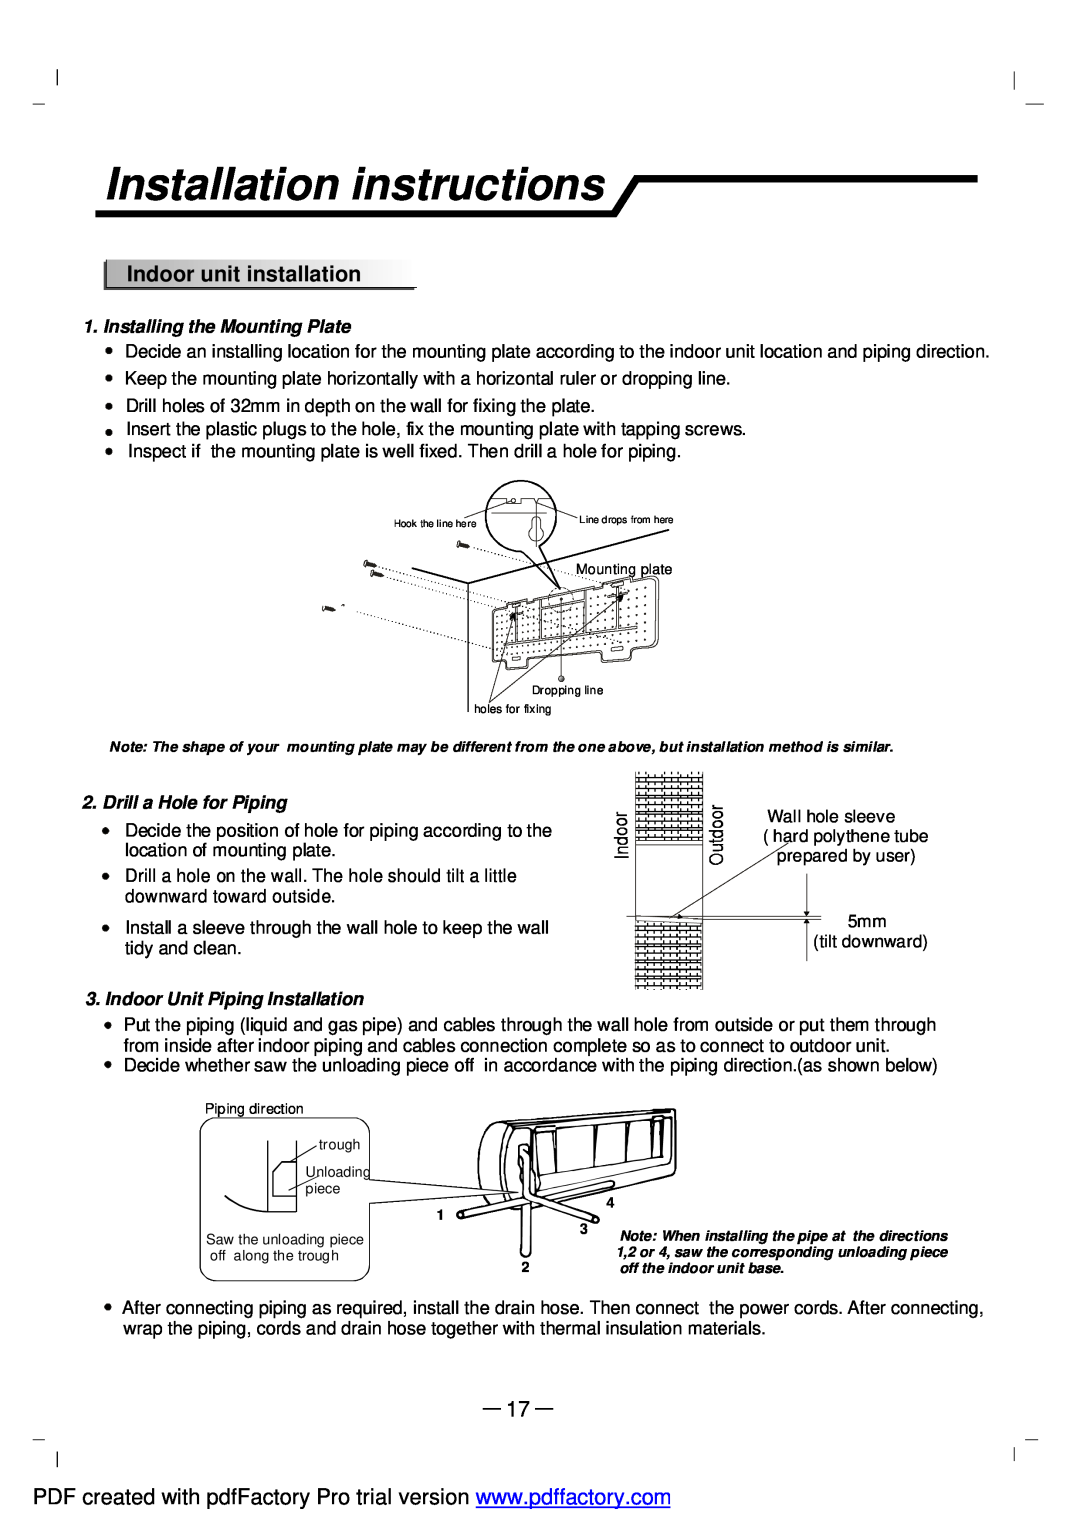 NEC RIH-6867 Installation instructions, Indoorunitinstallation, Installing the Mounting Plate, Drill a Hole for Piping 